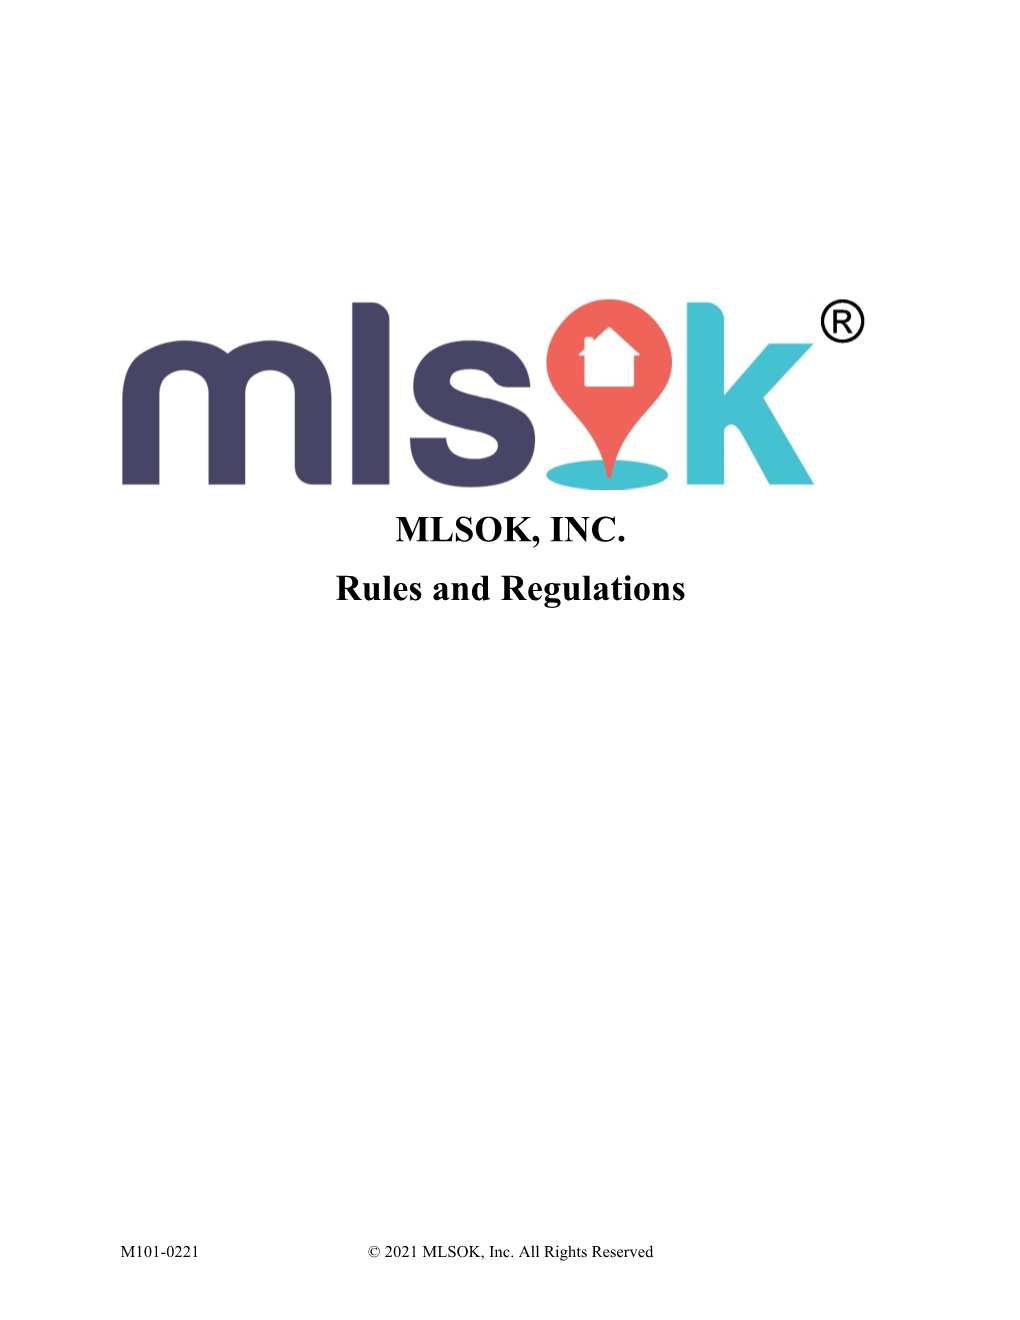 MLSOK, INC. Rules and Regulations